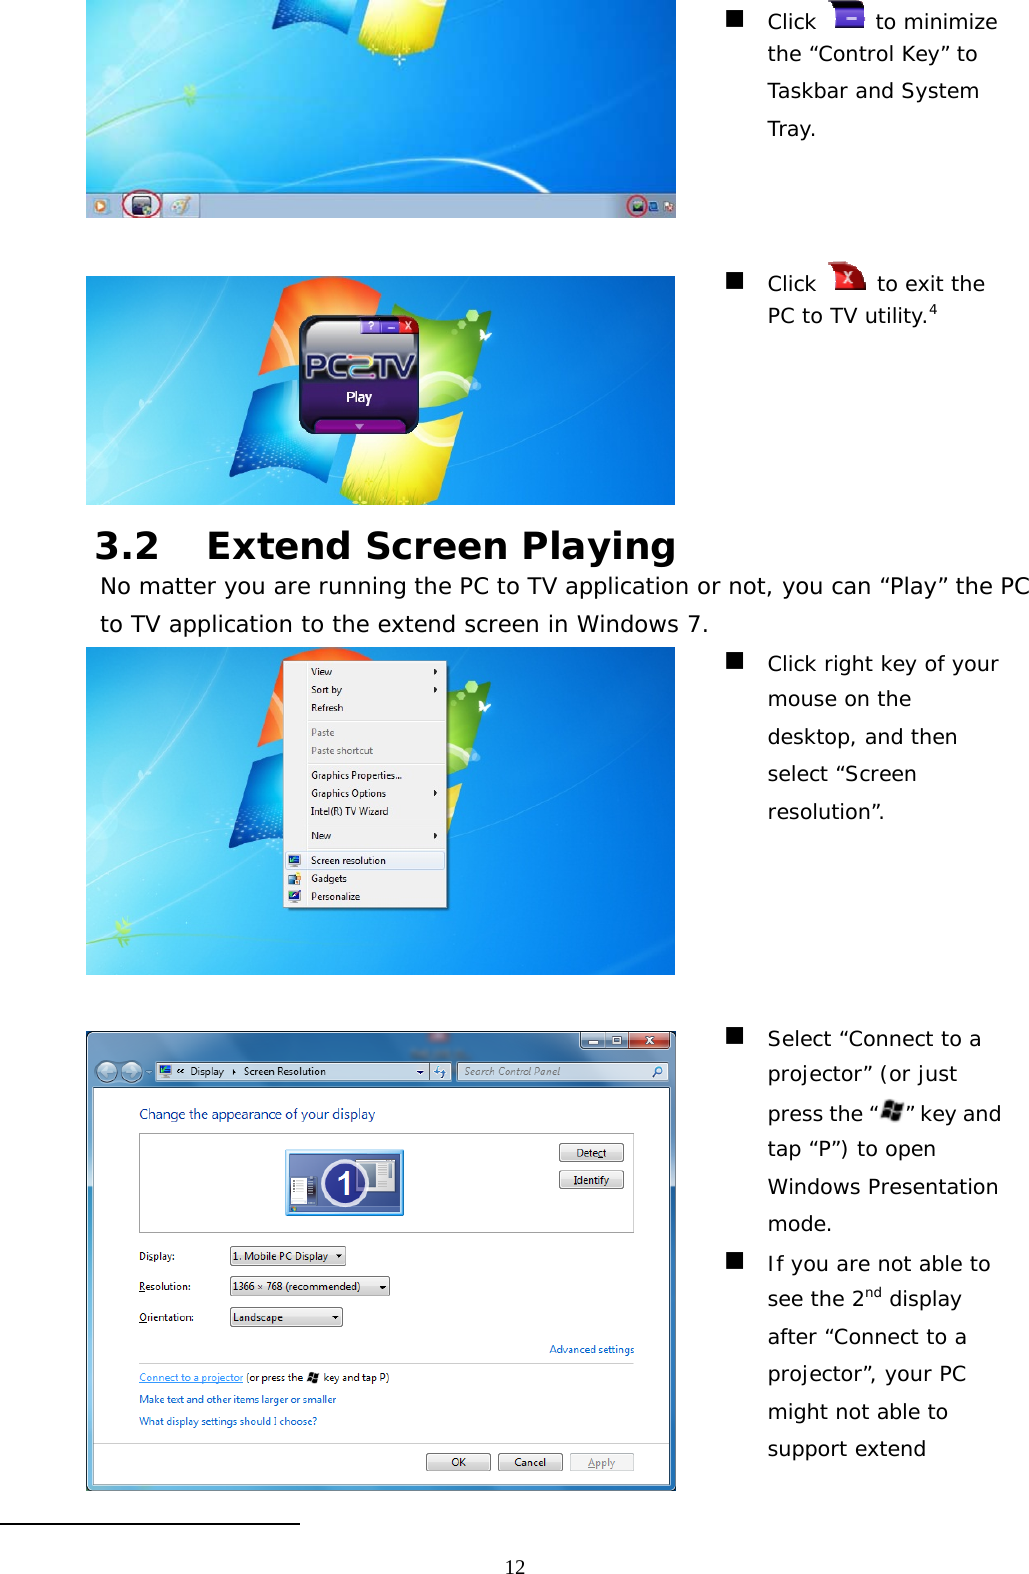   12   Click   to minimize the “Control Key” to Taskbar and System Tray.   Click   to exit the PC to TV utility.4 3.2 Extend Screen Playing No matter you are running the PC to TV application or not, you can “Play” the PC to TV application to the extend screen in Windows 7.    Click right key of your mouse on the desktop, and then select “Screen resolution”.   Select “Connect to a projector” (or just press the “ ” key and tap “P”) to open Windows Presentation mode.  If you are not able to see the 2nd display after “Connect to a projector”, your PC might not able to support extend                                                   